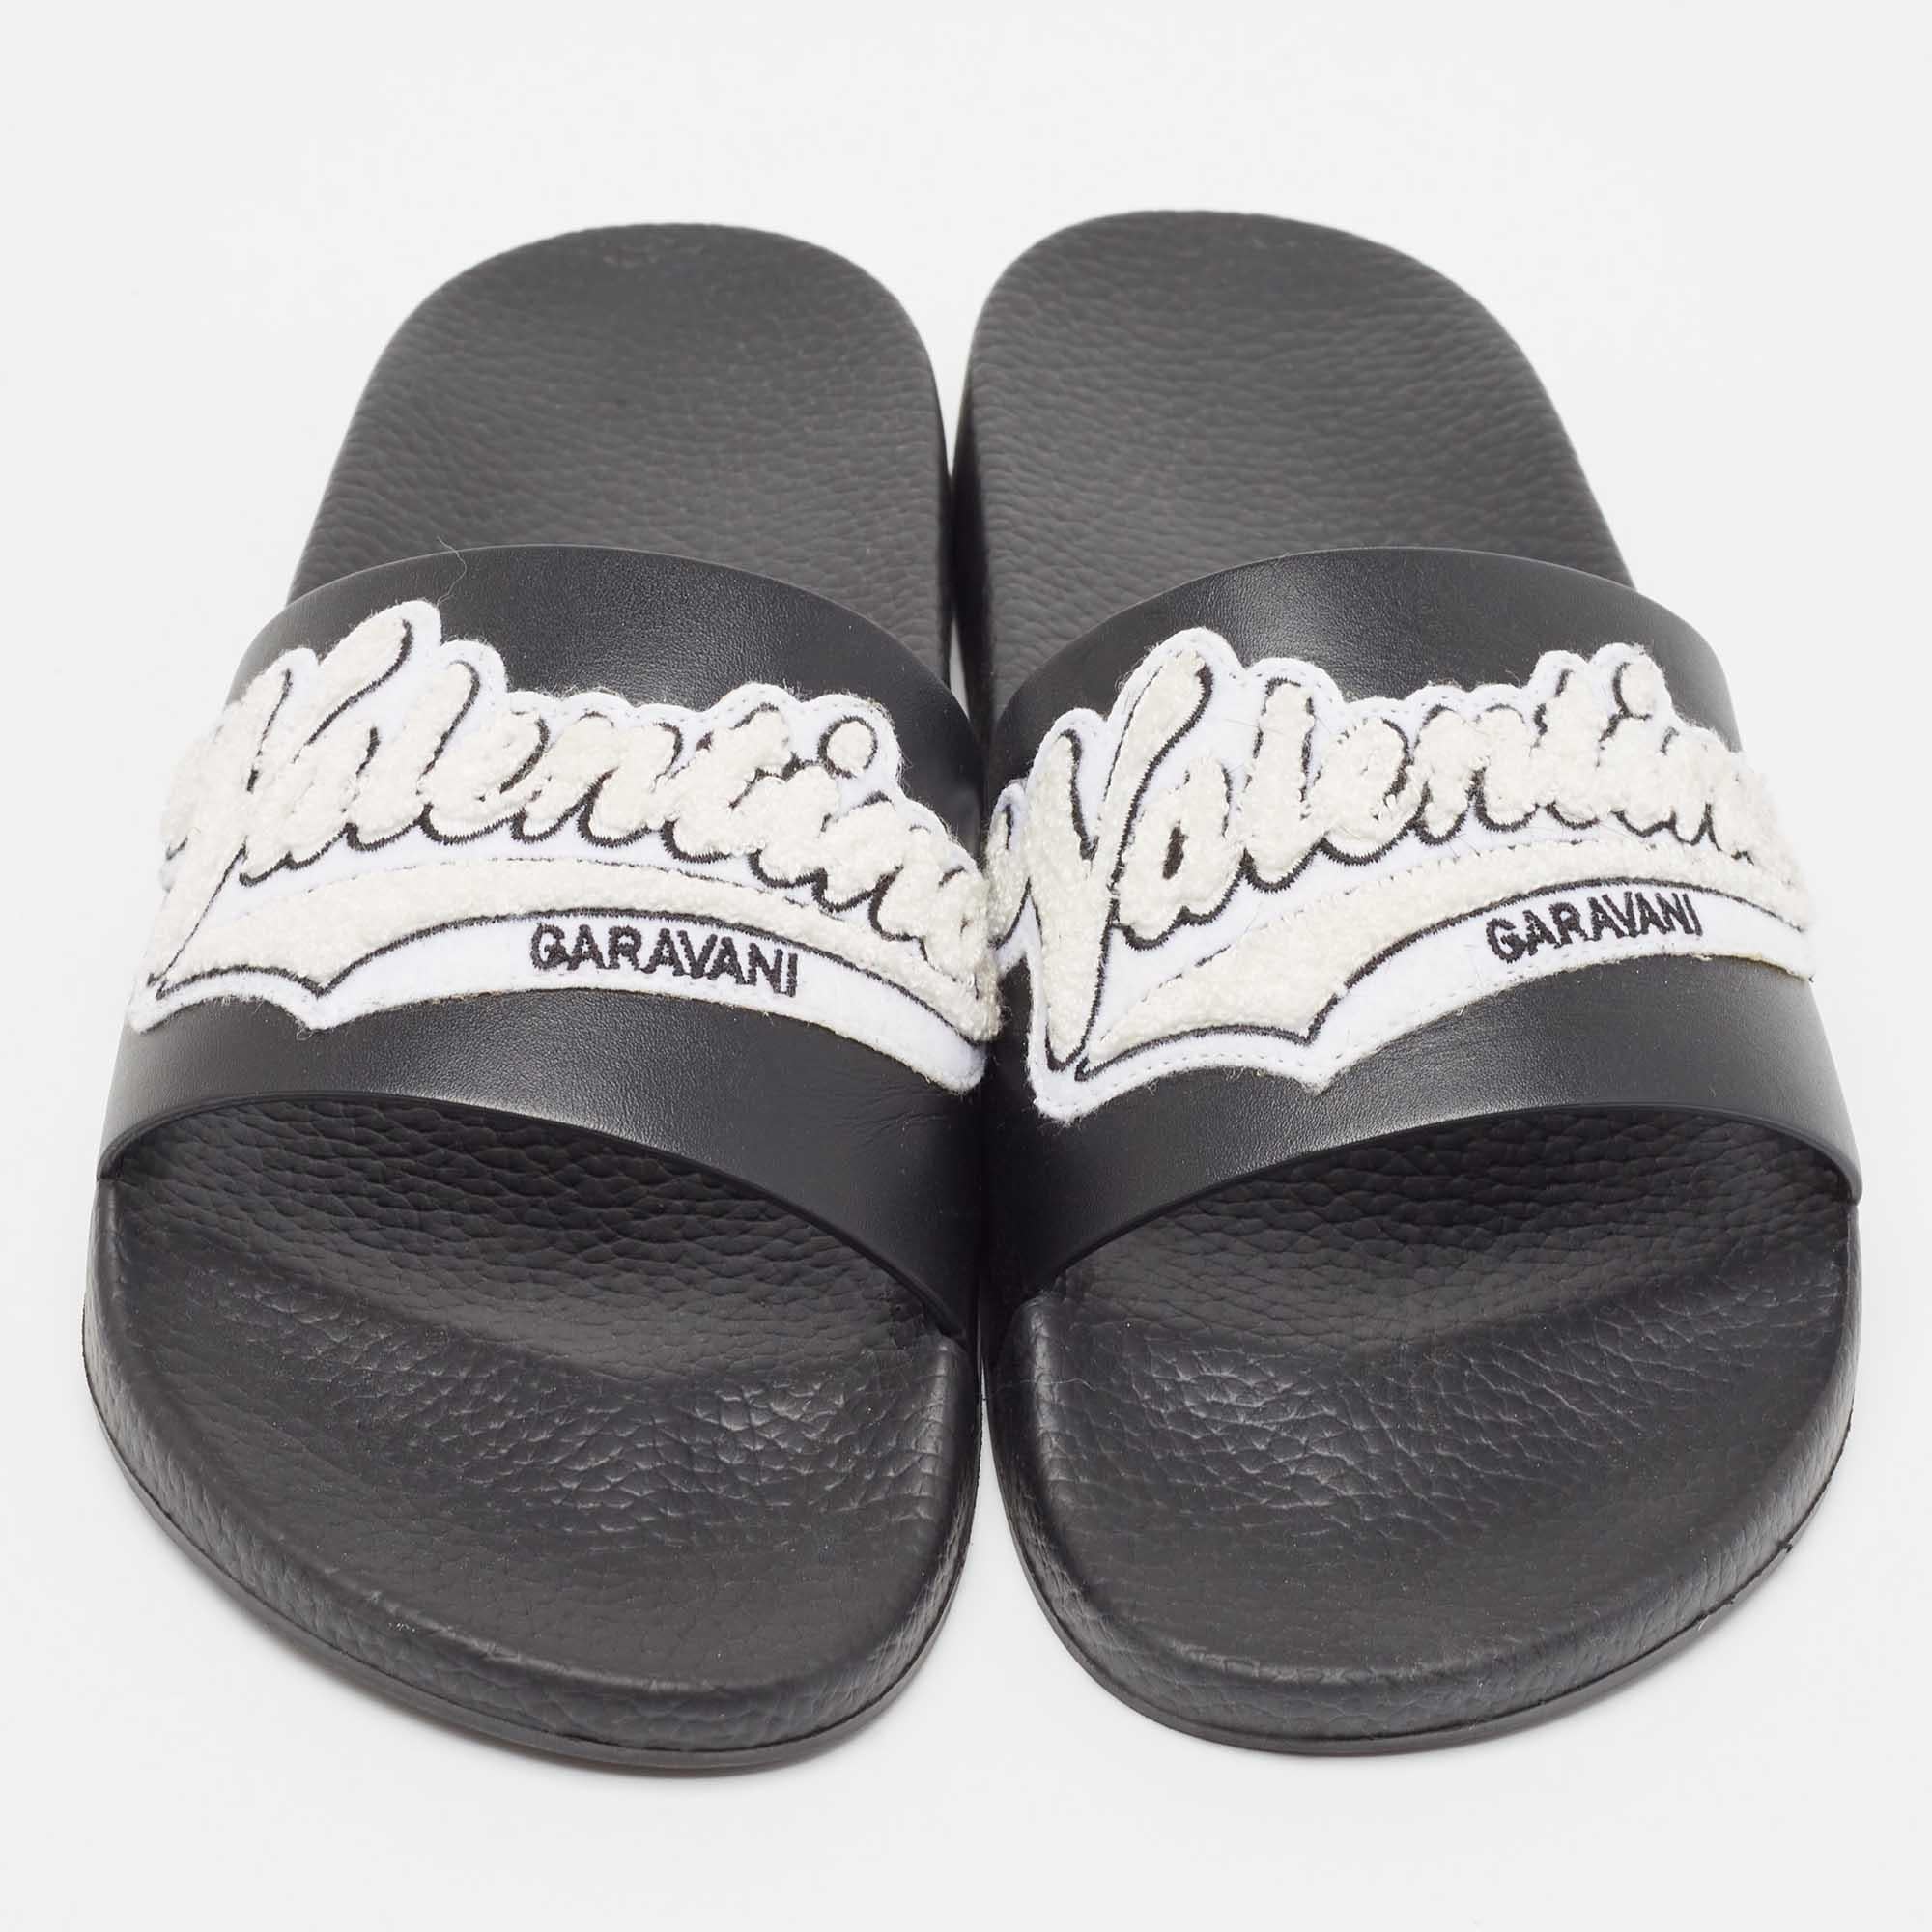 Comfort and style come together with these slides from Valentino! The black slides are crafted from rubber and feature an open-toe silhouette. They flaunt logo patch detail on the vamp straps and are sure to make your feet very happy!

